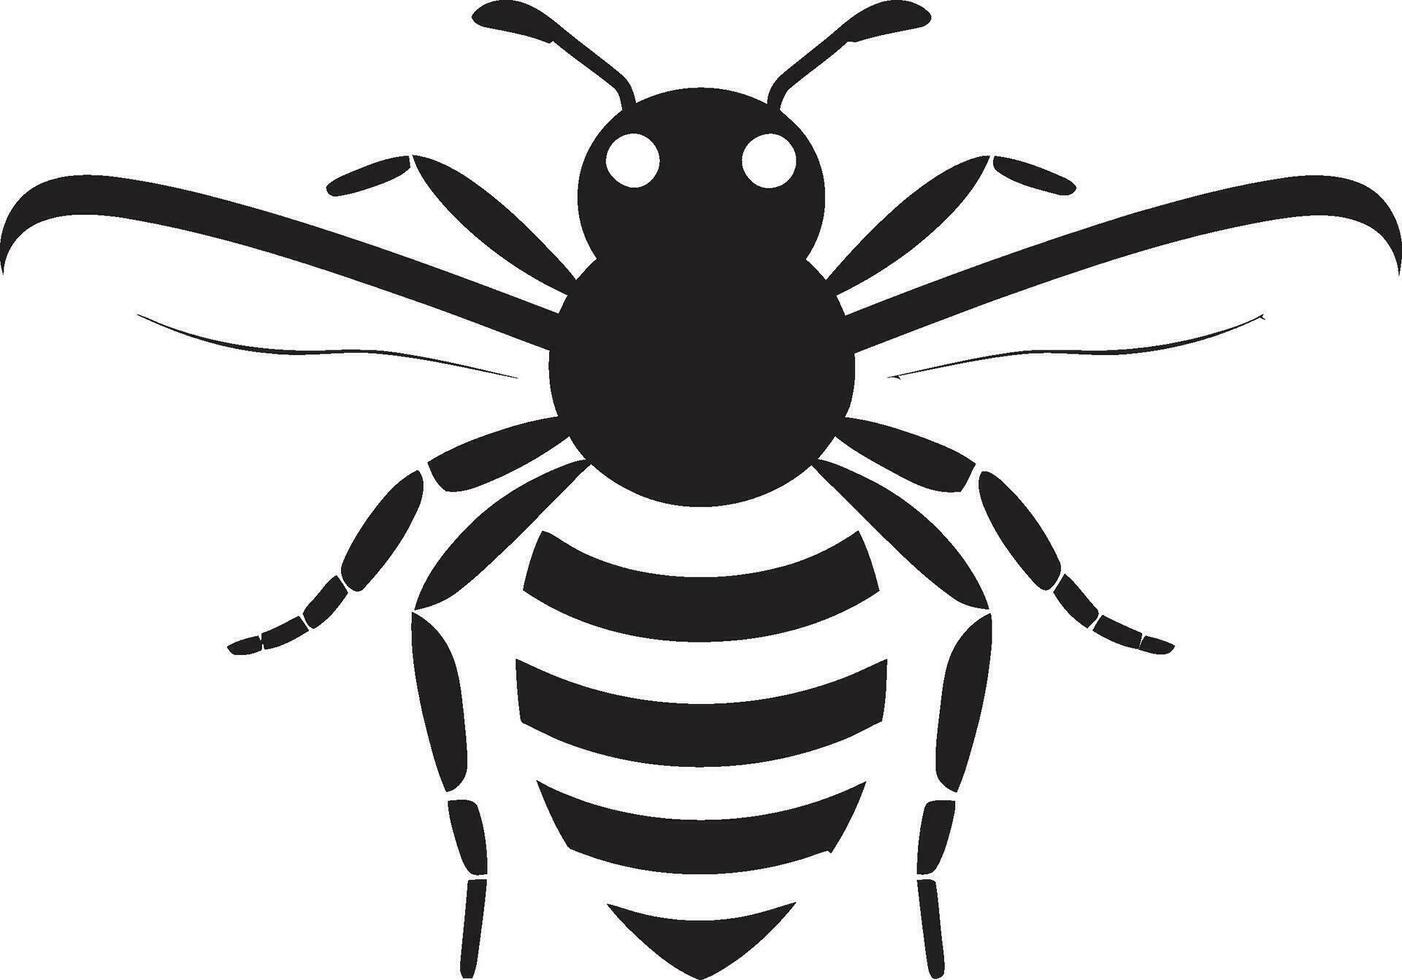 Silhouette of a Buzzing Defender Vectorized Monochrome Hornet Icon vector